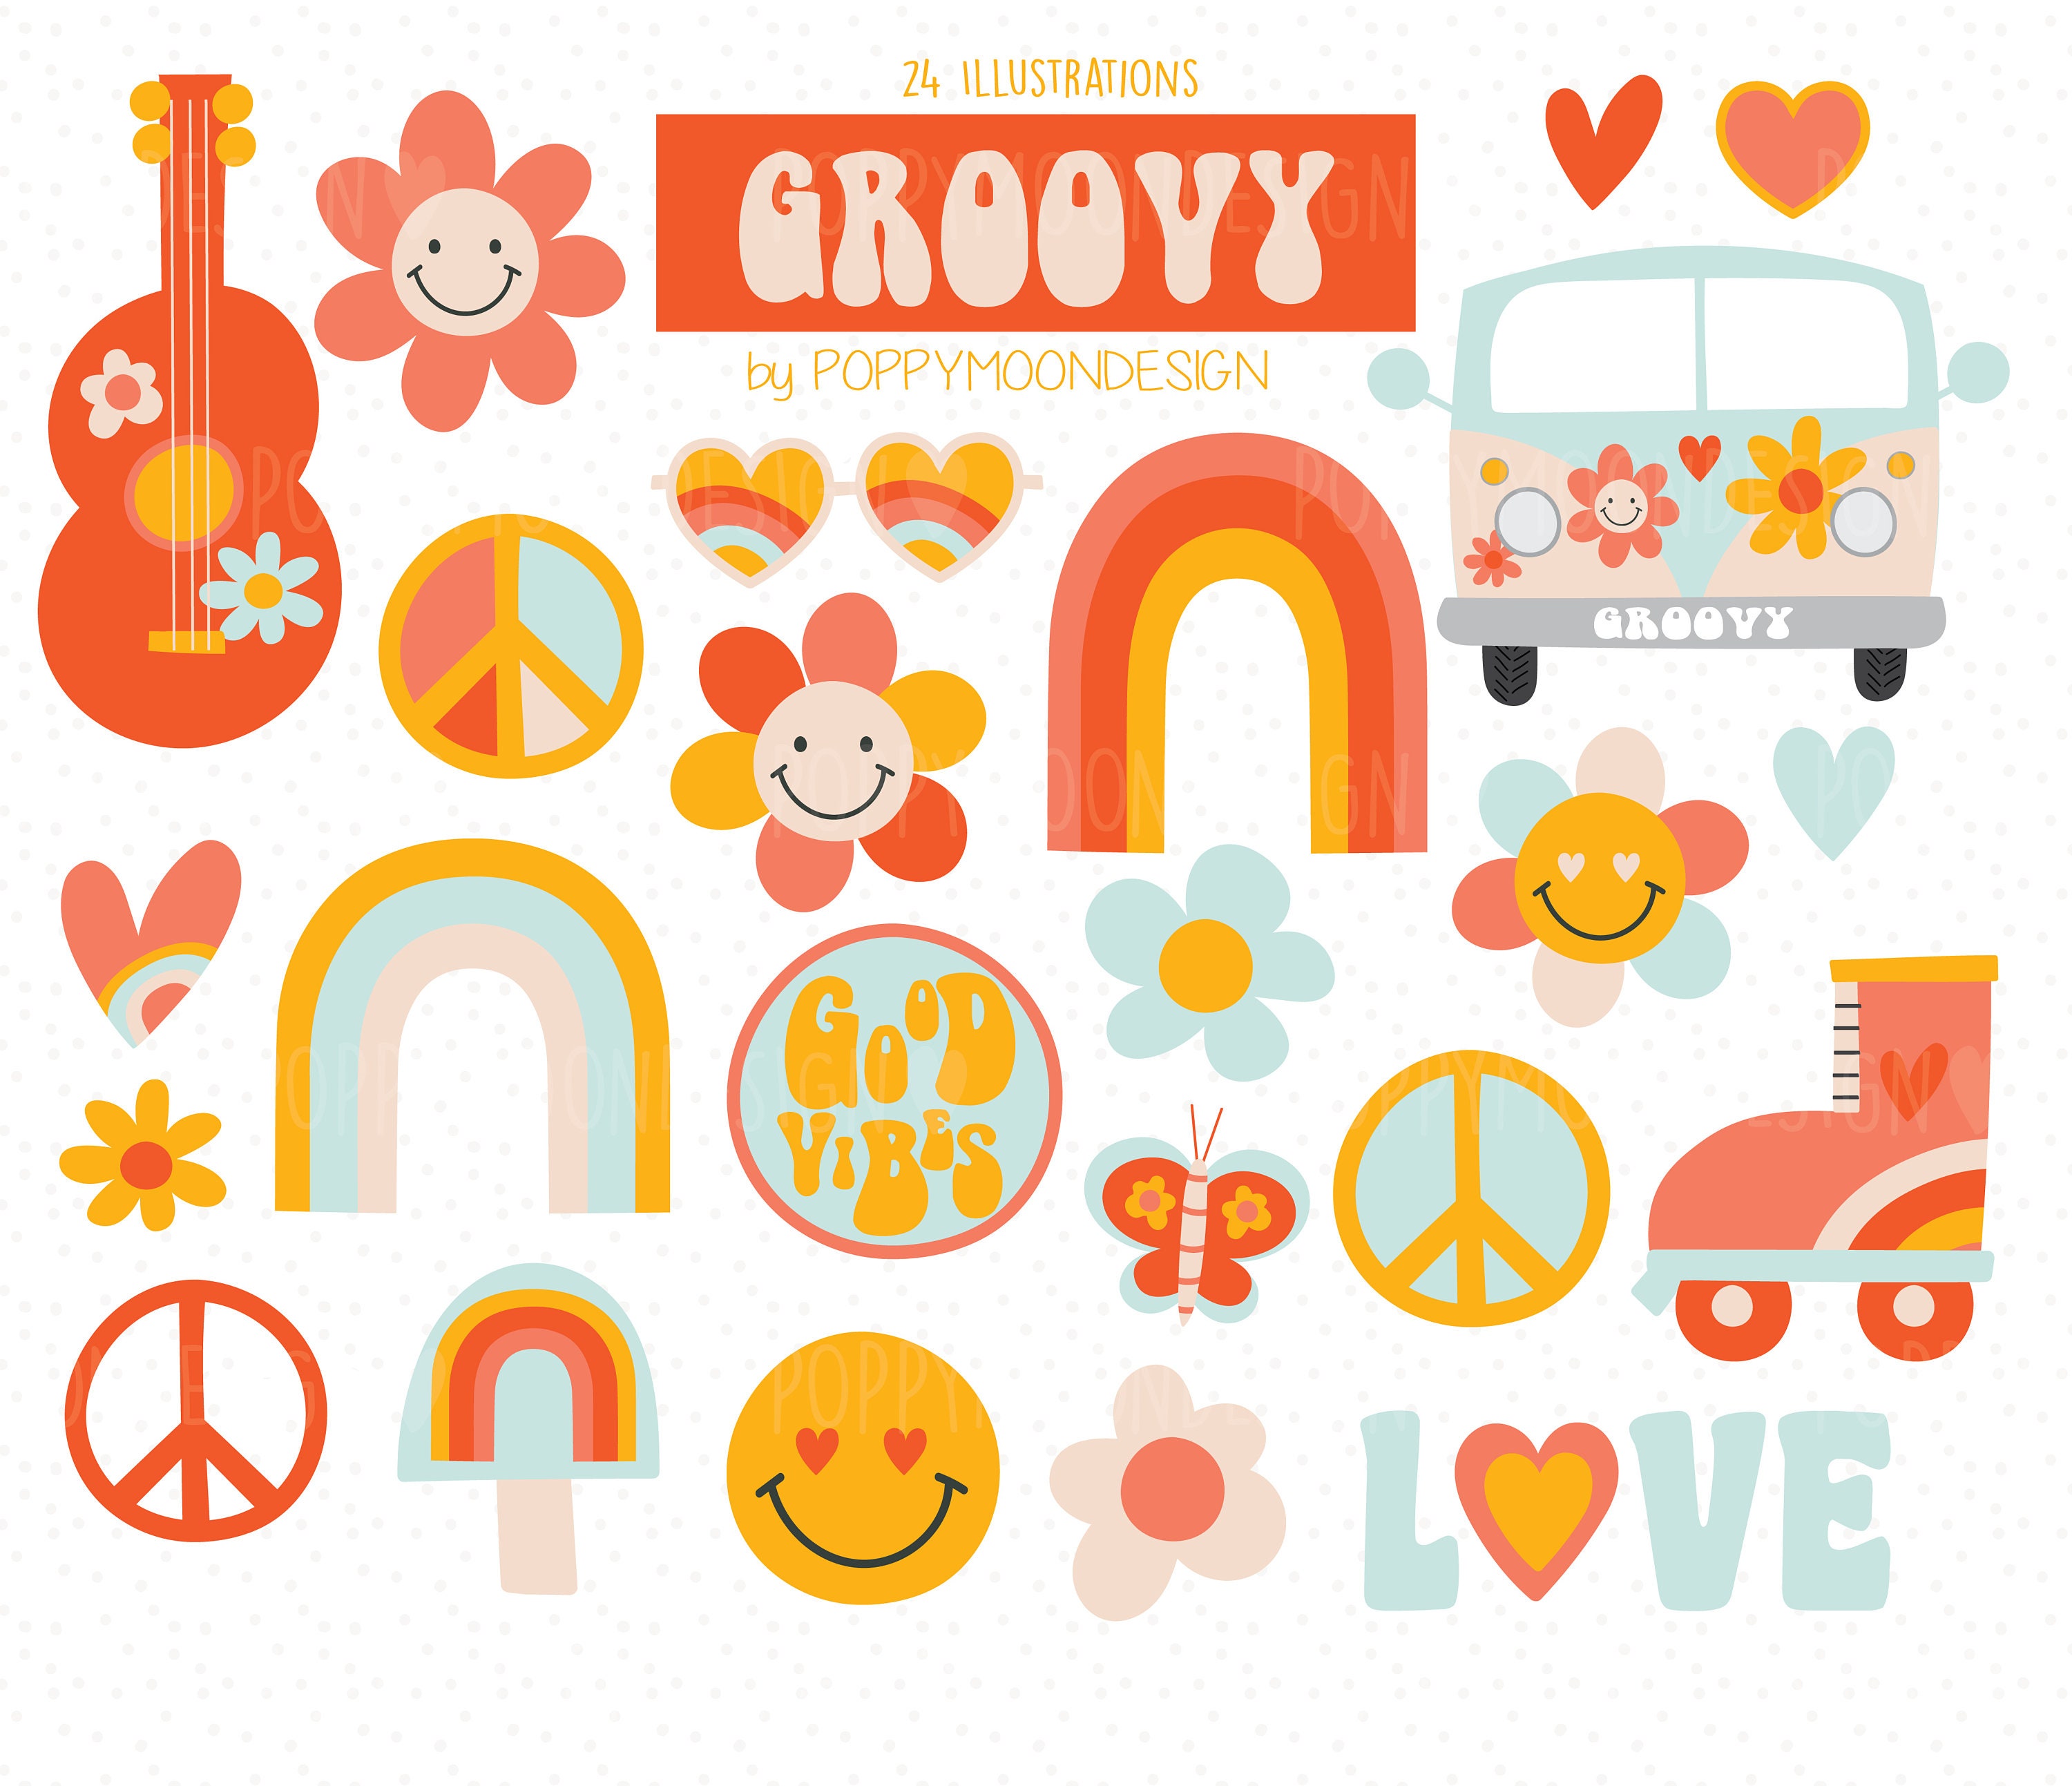 Groovy Hippie Spiritual Stickers. Pack of 95 